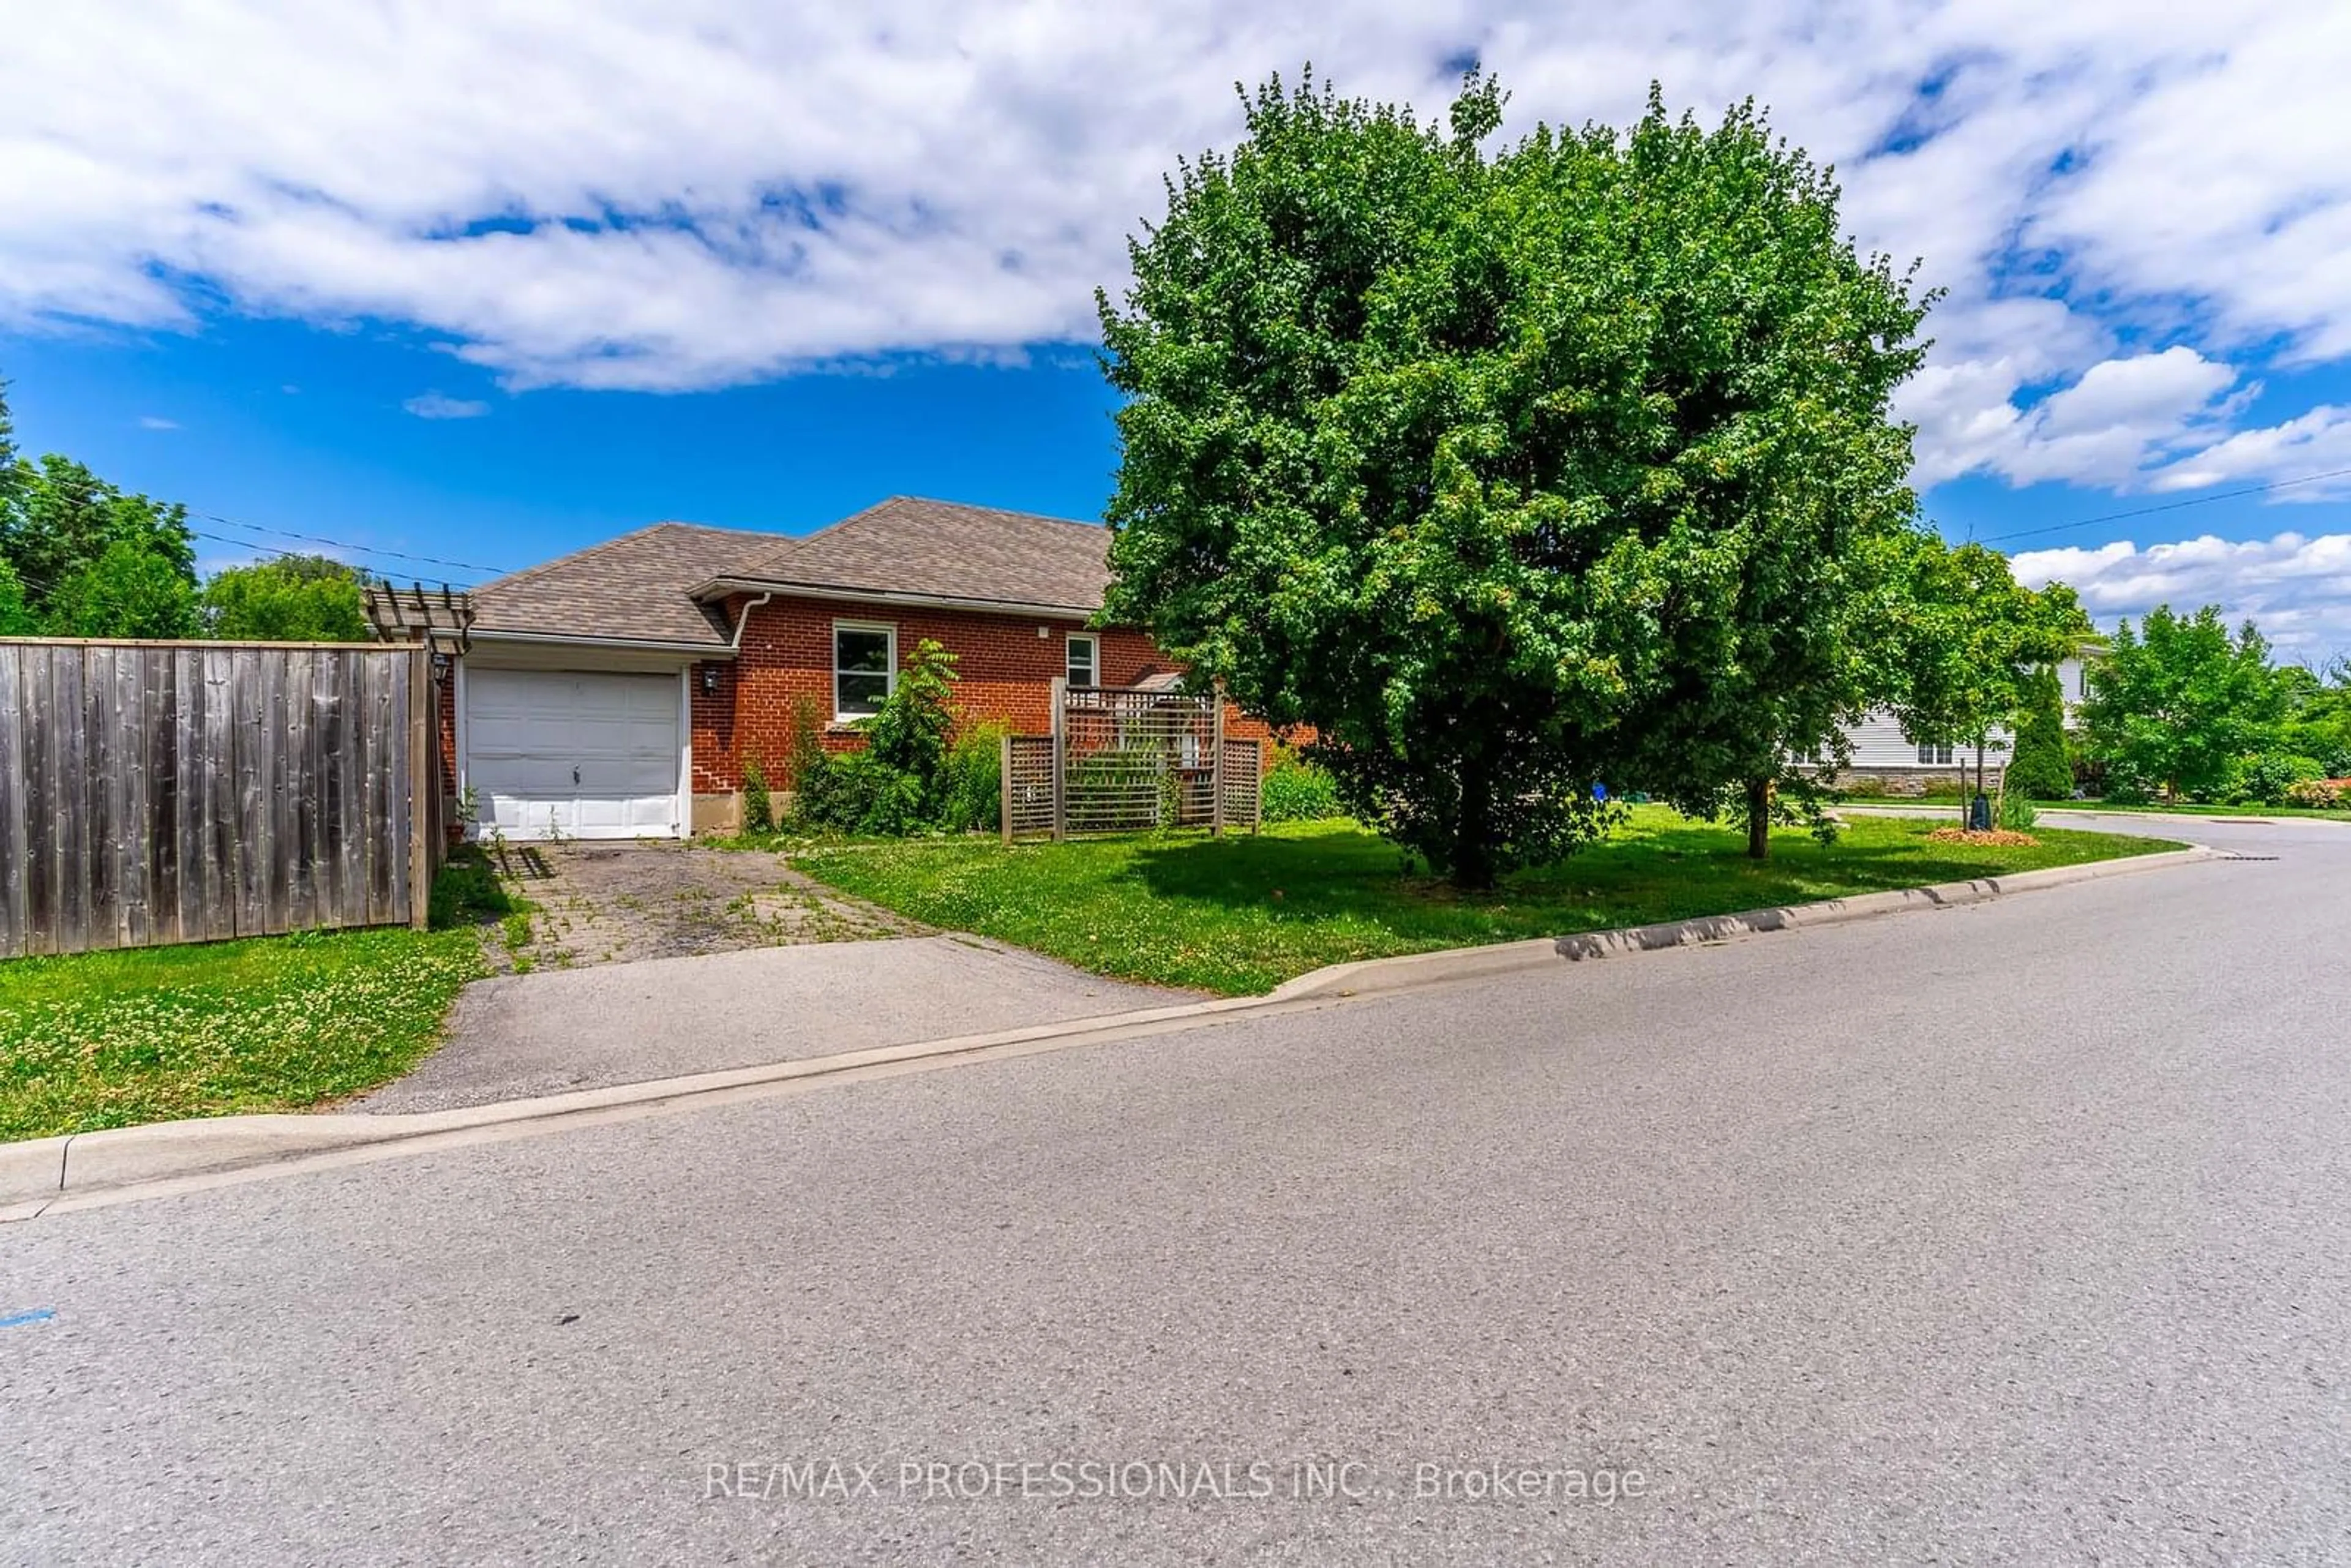 Street view for 170 Highland Ave, St. Catharines Ontario L2R 4J6